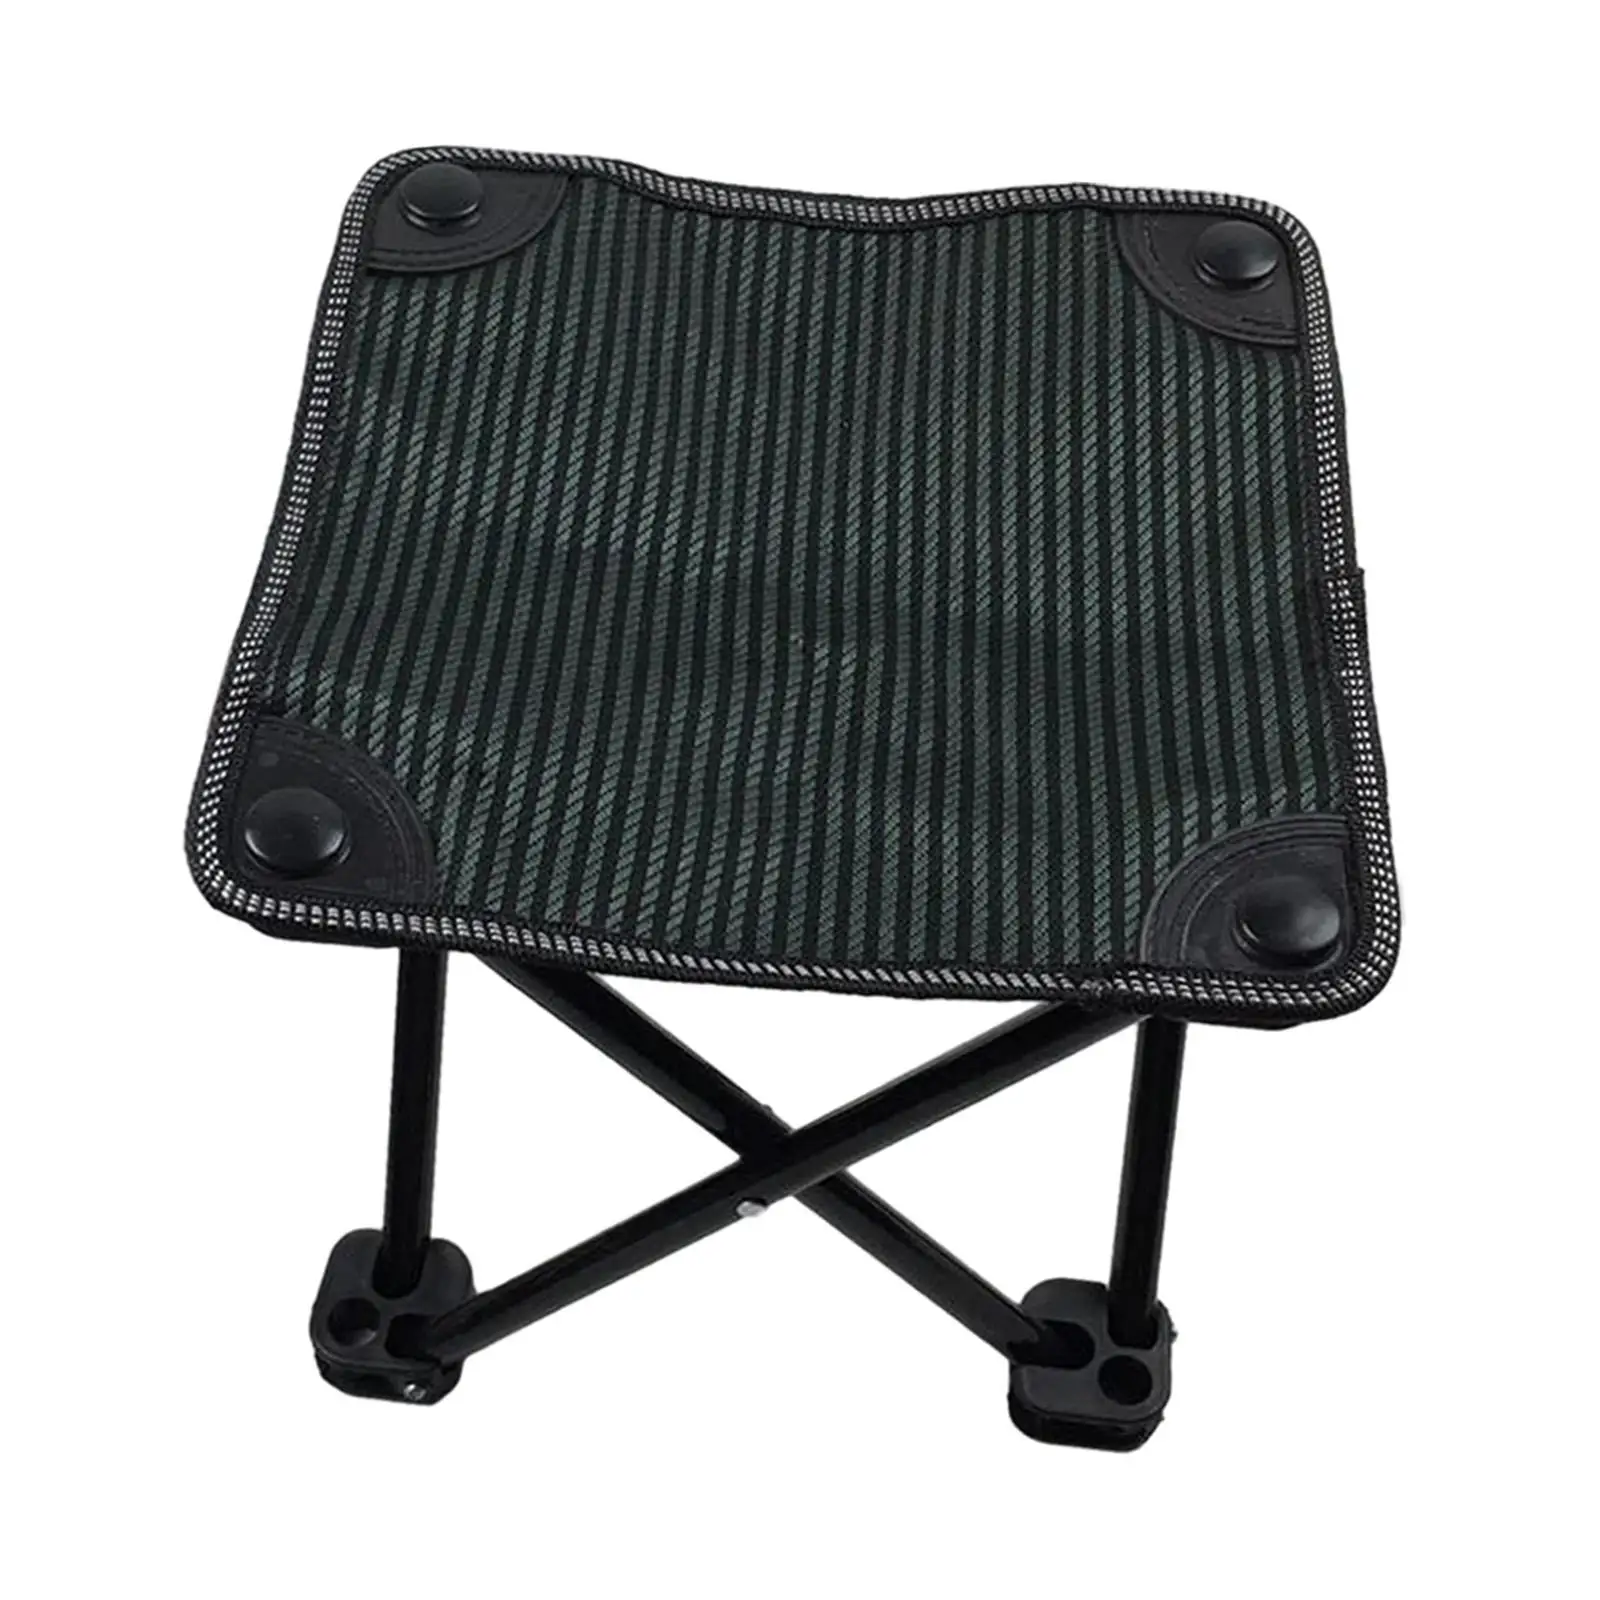 Camping Folding Stool Compact Footrest under Desk Footstool Fishing Chair for Traveling Concert Fishing Backpacking Gardening